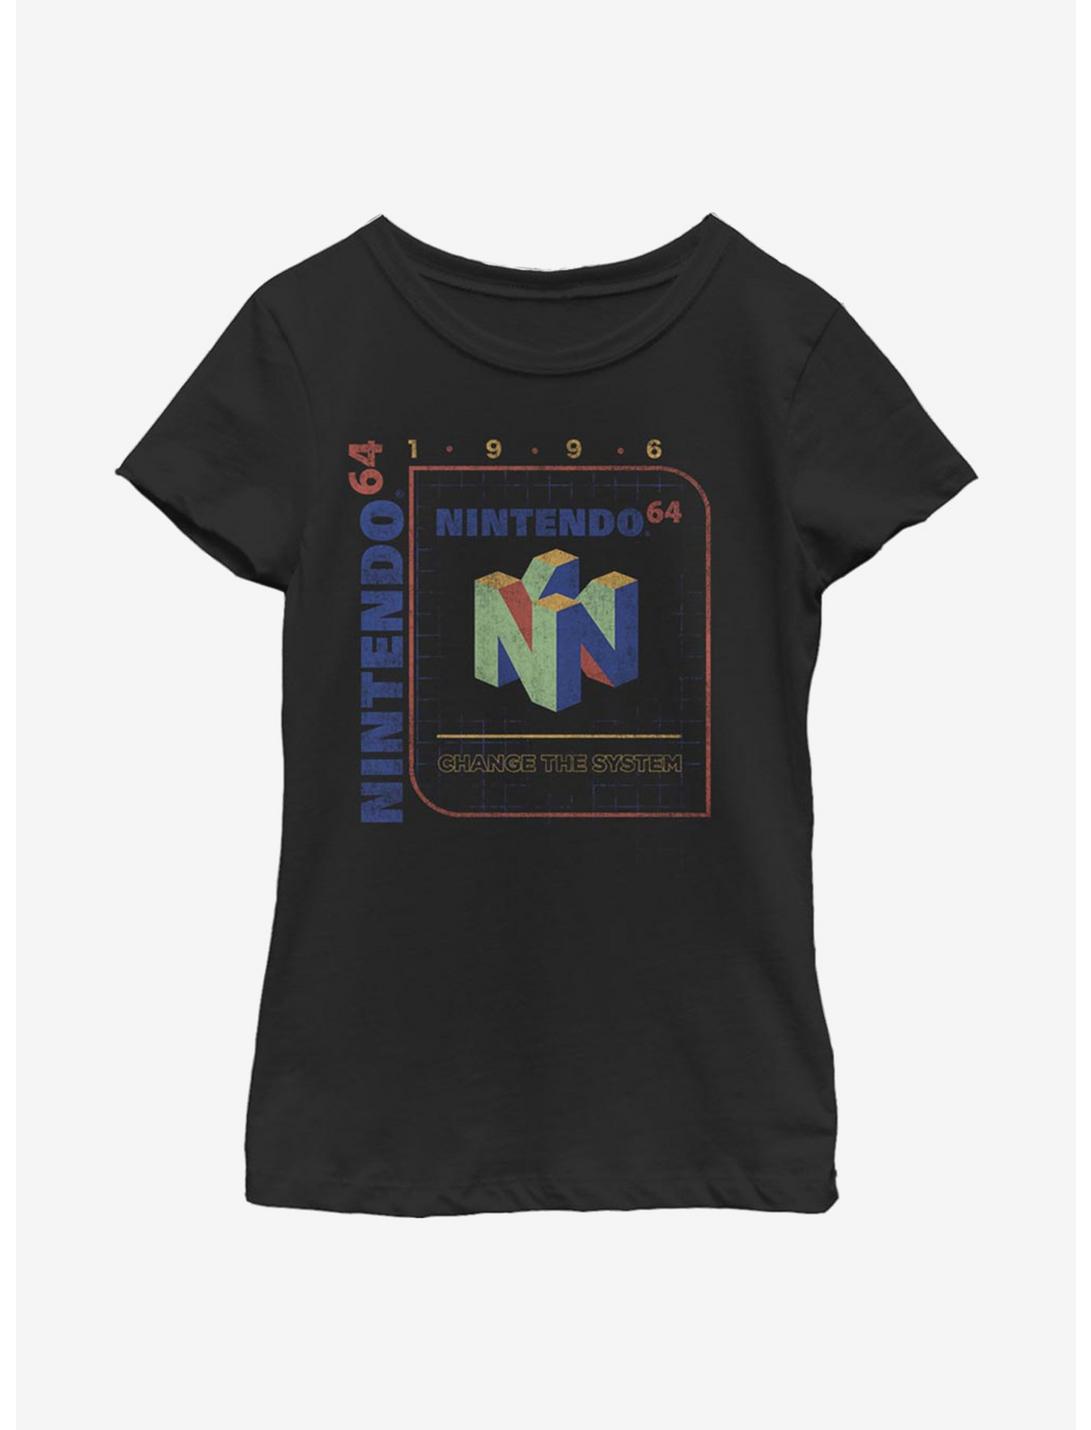 Nintendo Project Reality Youth Girls T-Shirt, BLACK, hi-res